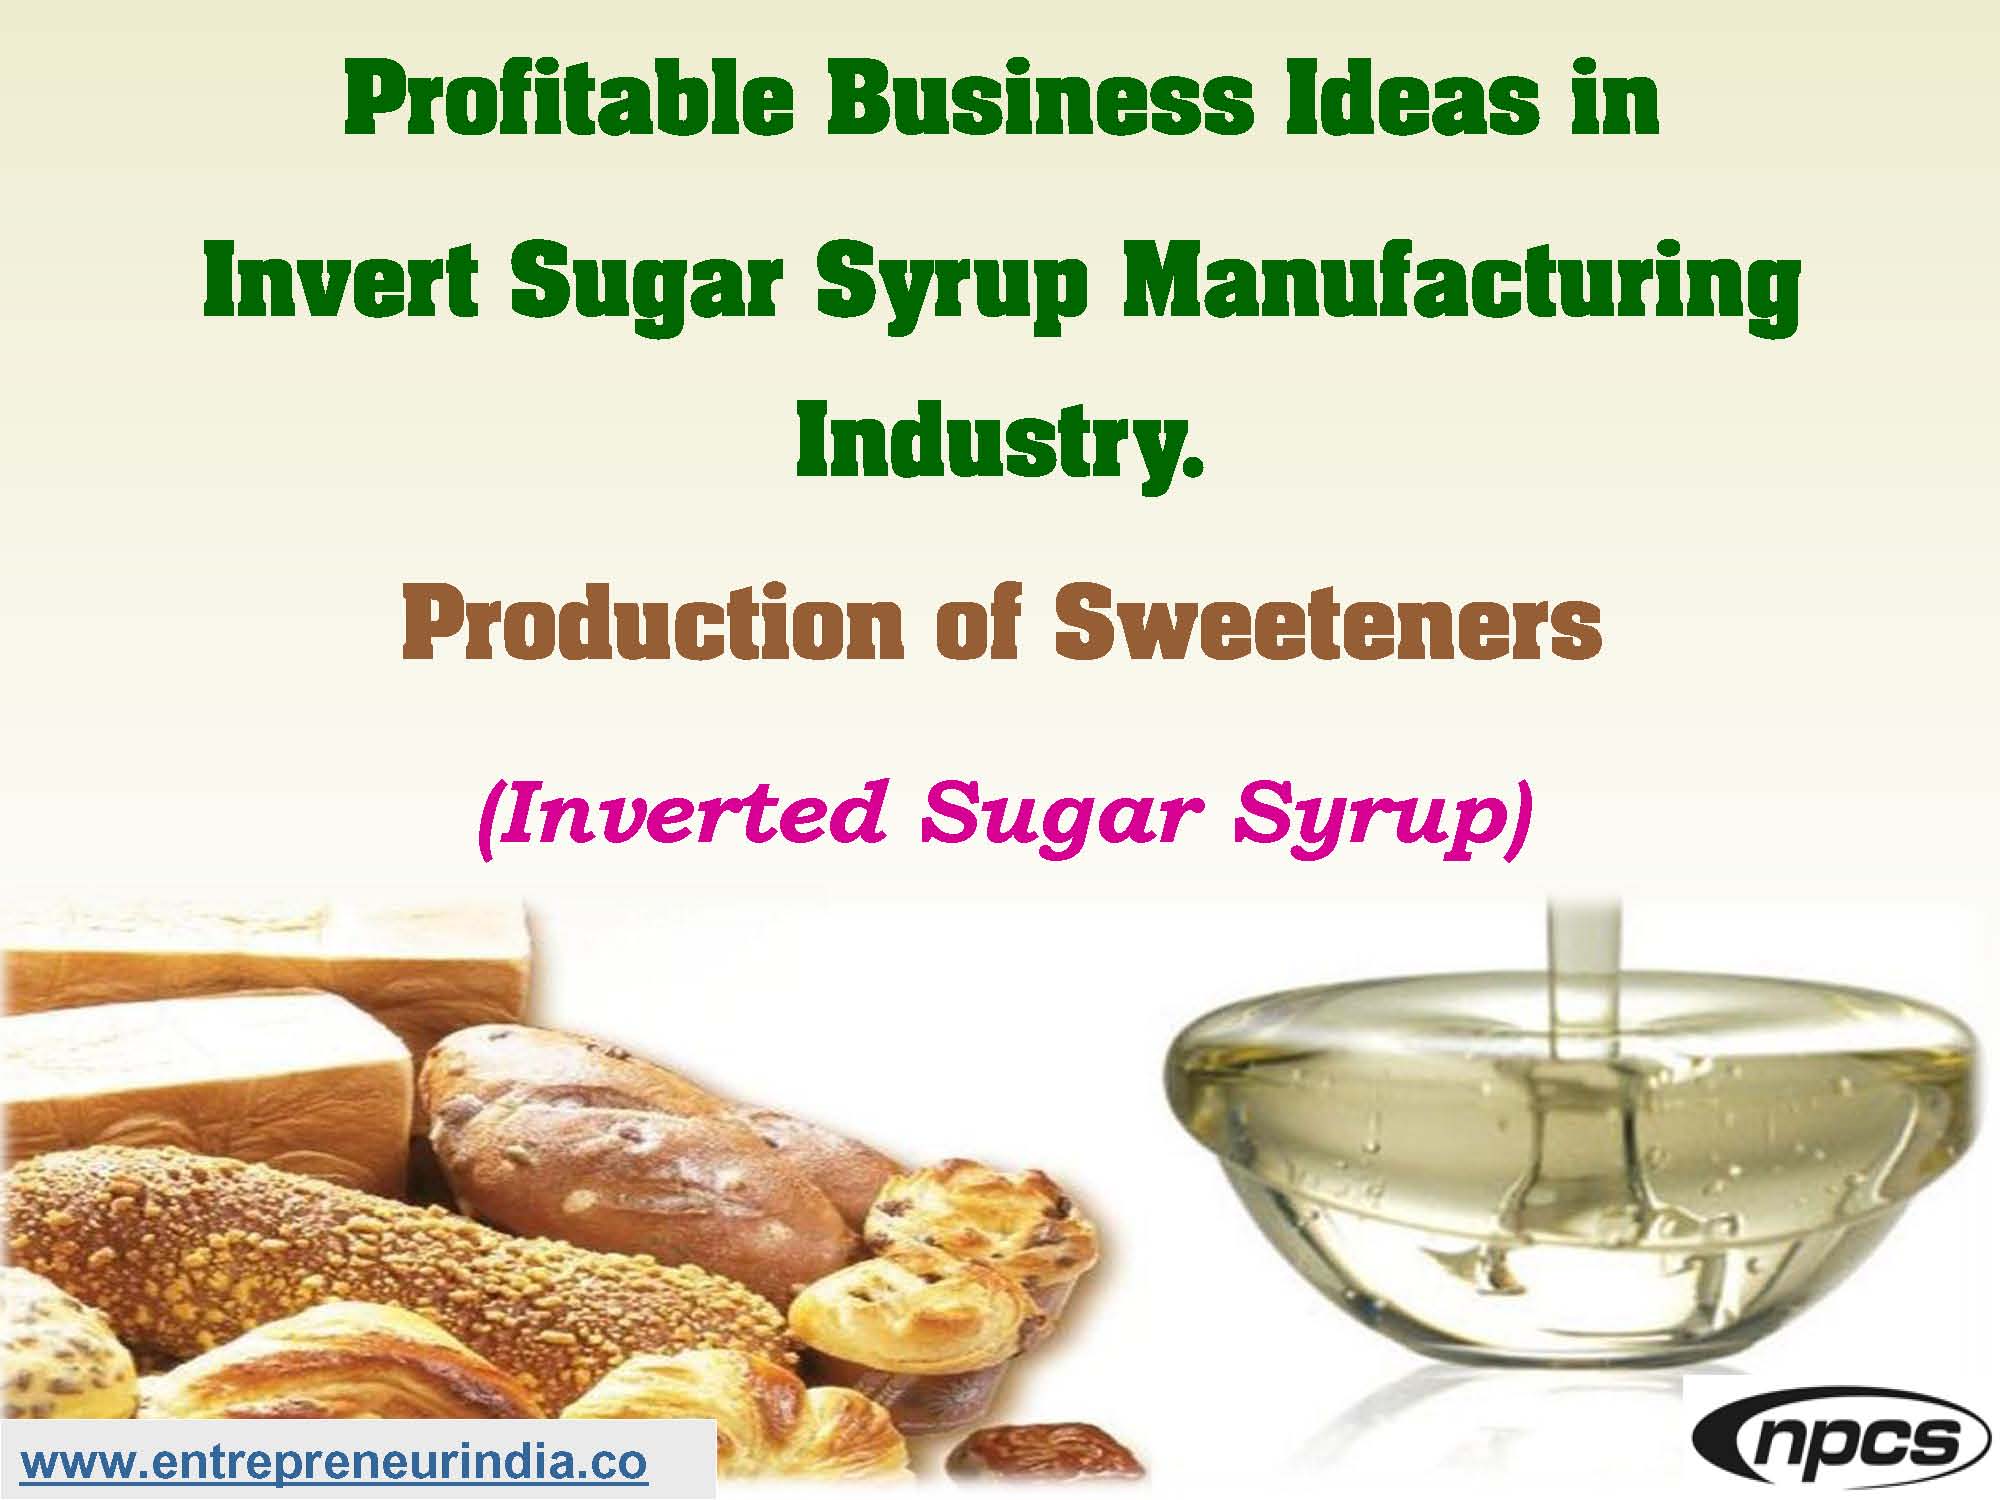 Profitable Business Ideas in Invert Sugar Syrup Manufacturing Industry